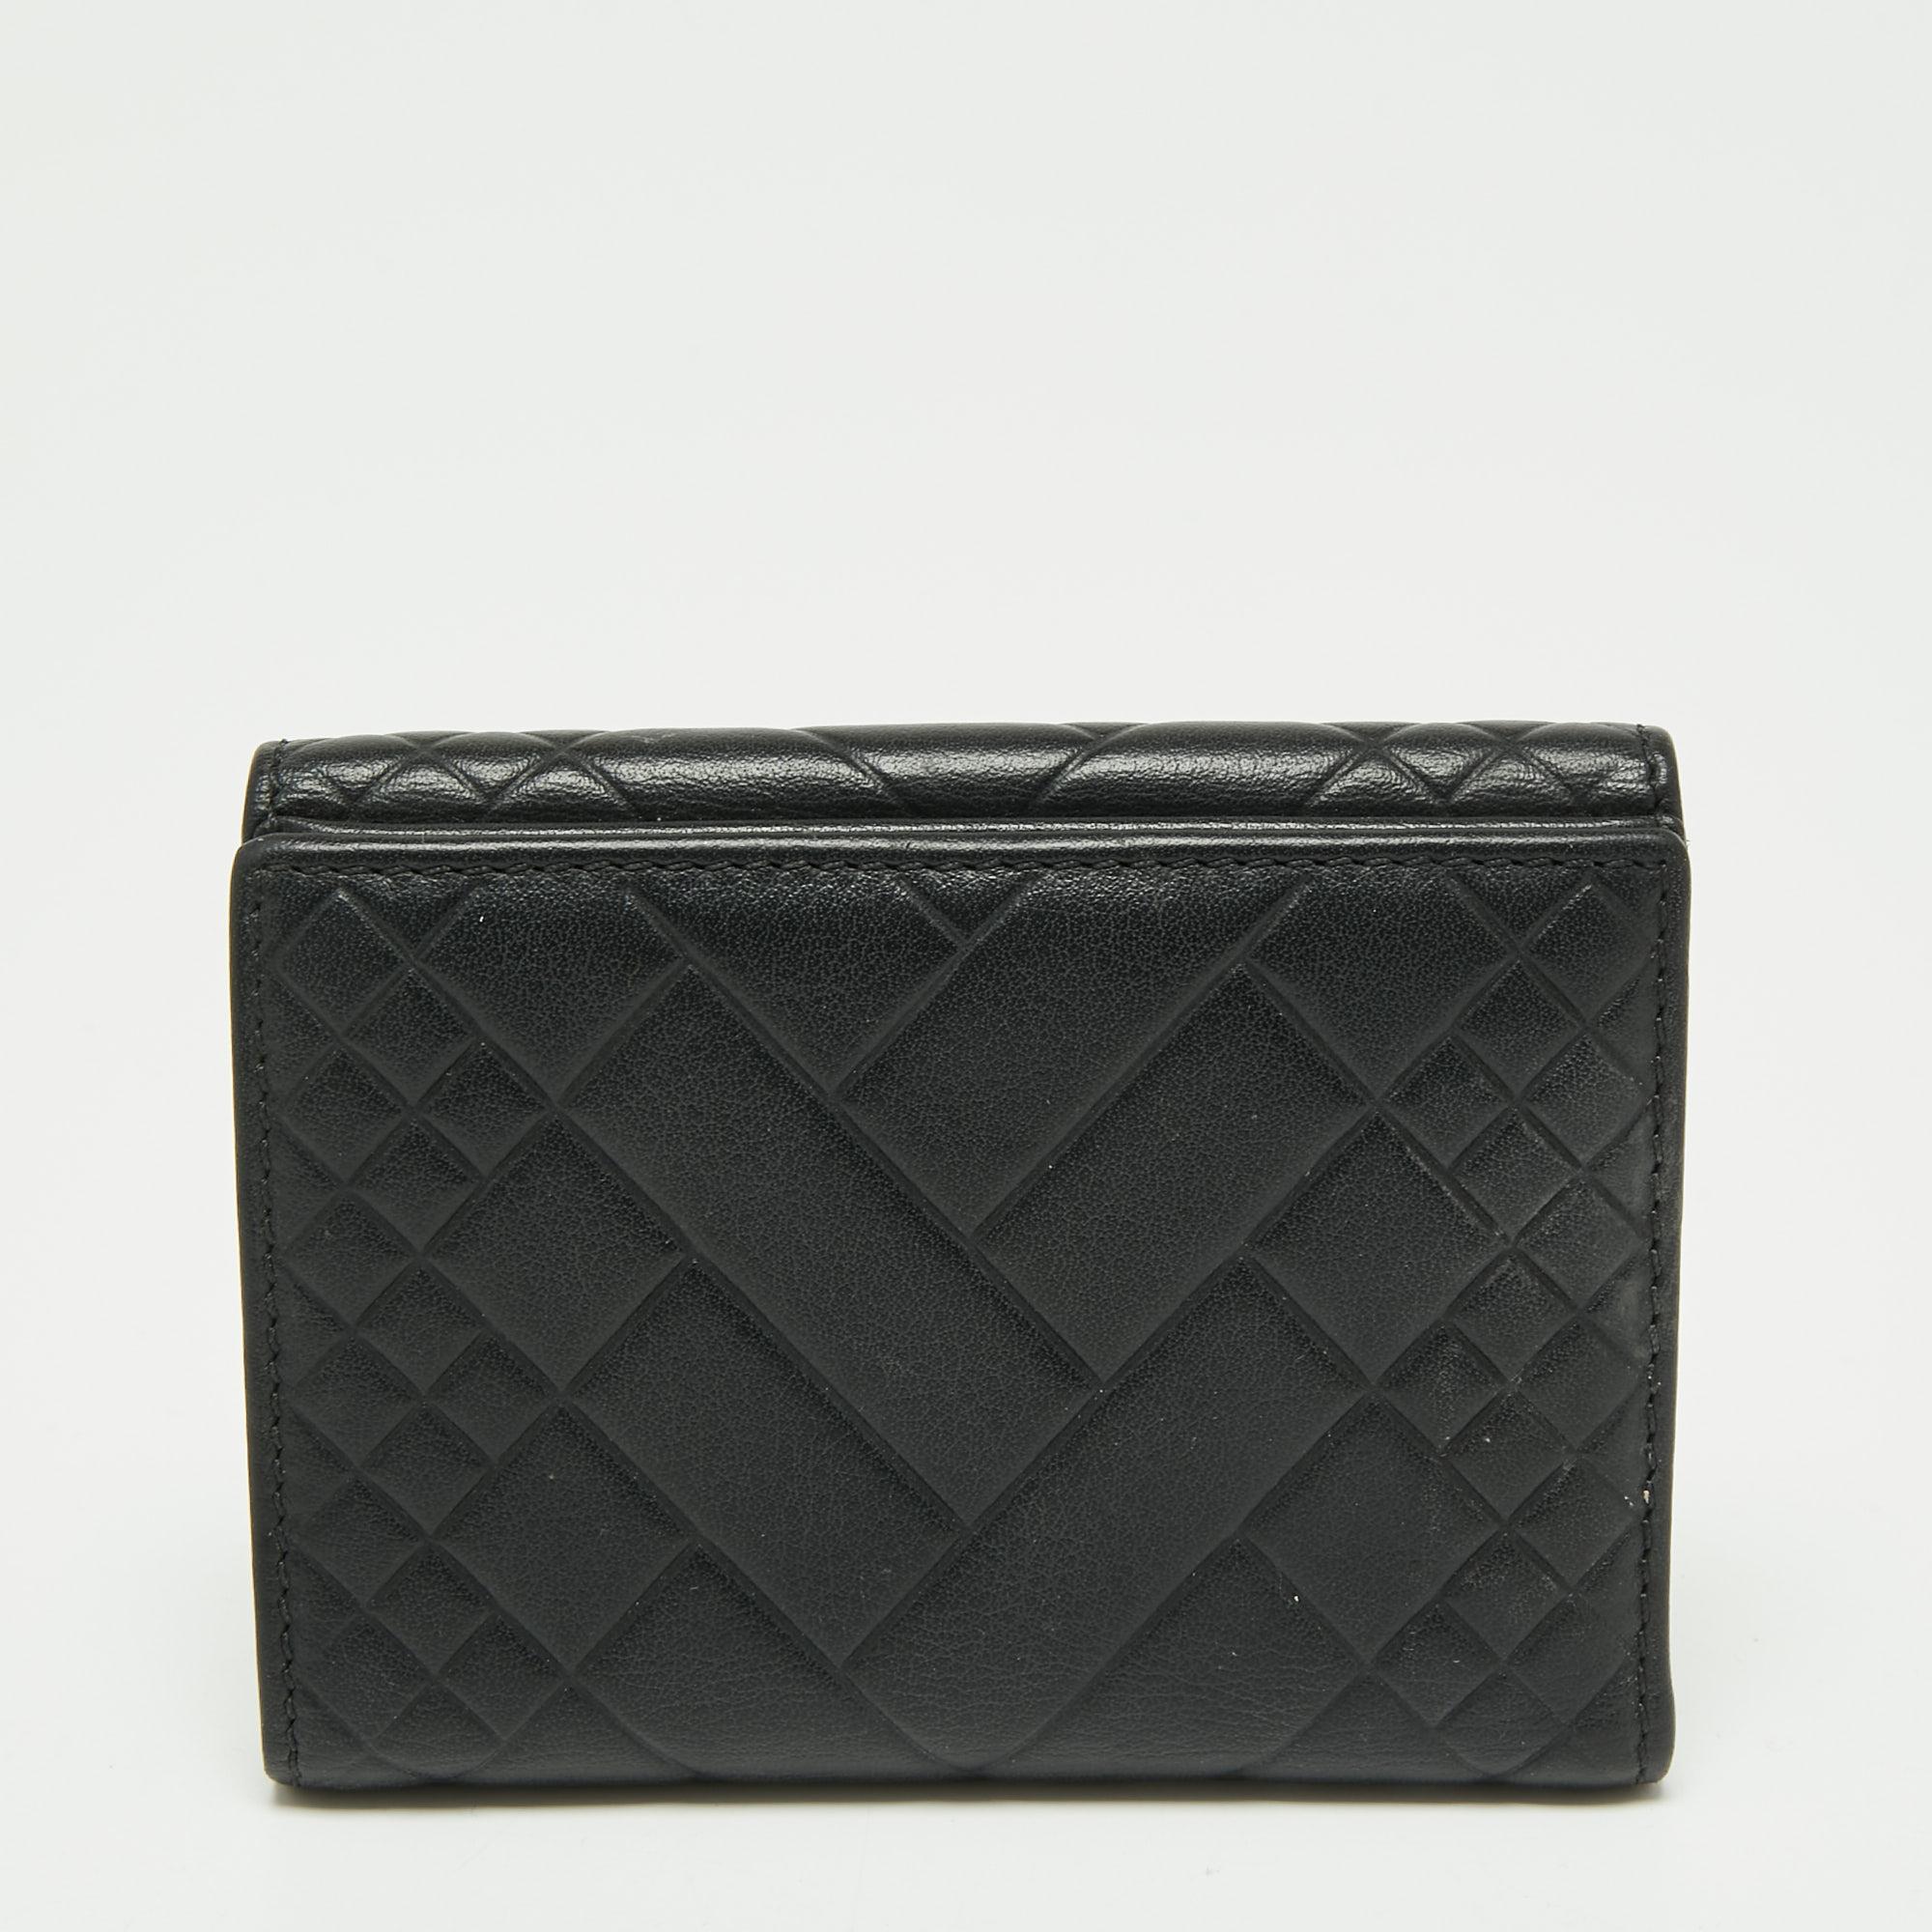 Packed with functional features, this CH Carolina Herrera compact wallet is neatly wrapped close with a metal press closure. It is crafted using black quilted leather and highlighted with the logo on the front.
